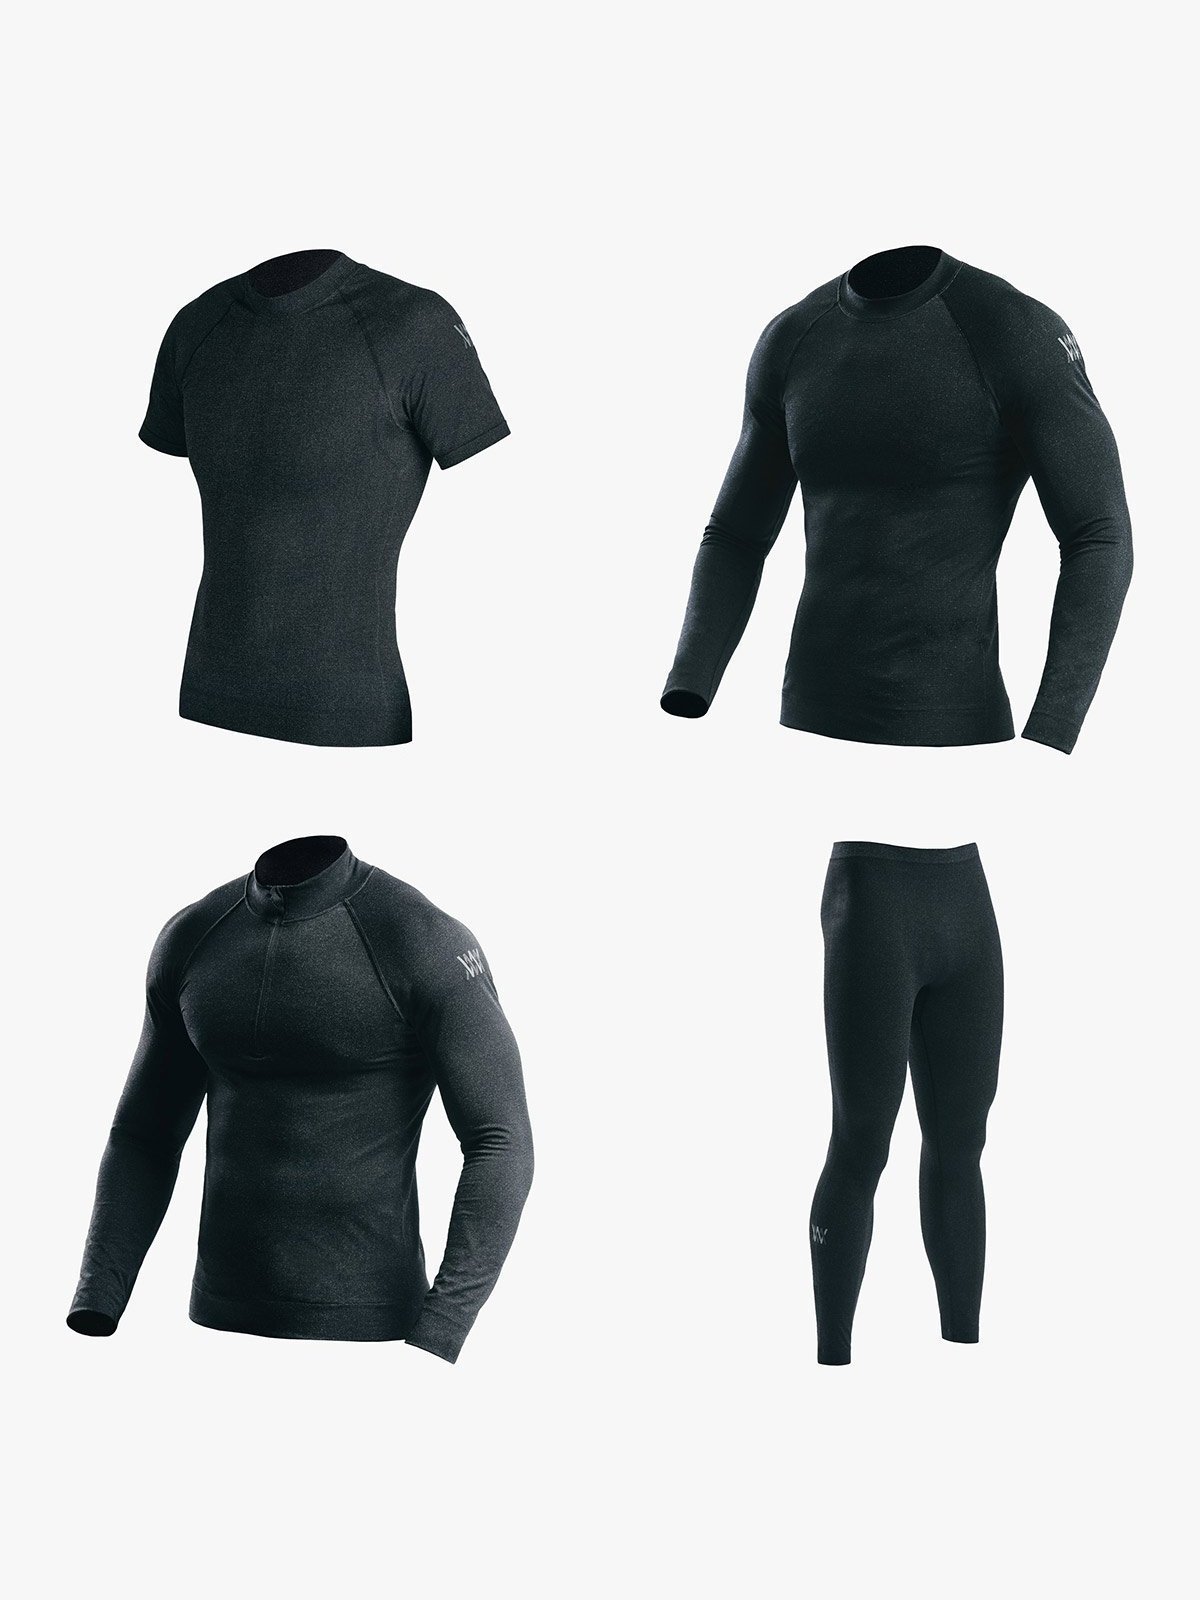 Base Layers  Seamless. Better performance in all circumstances.